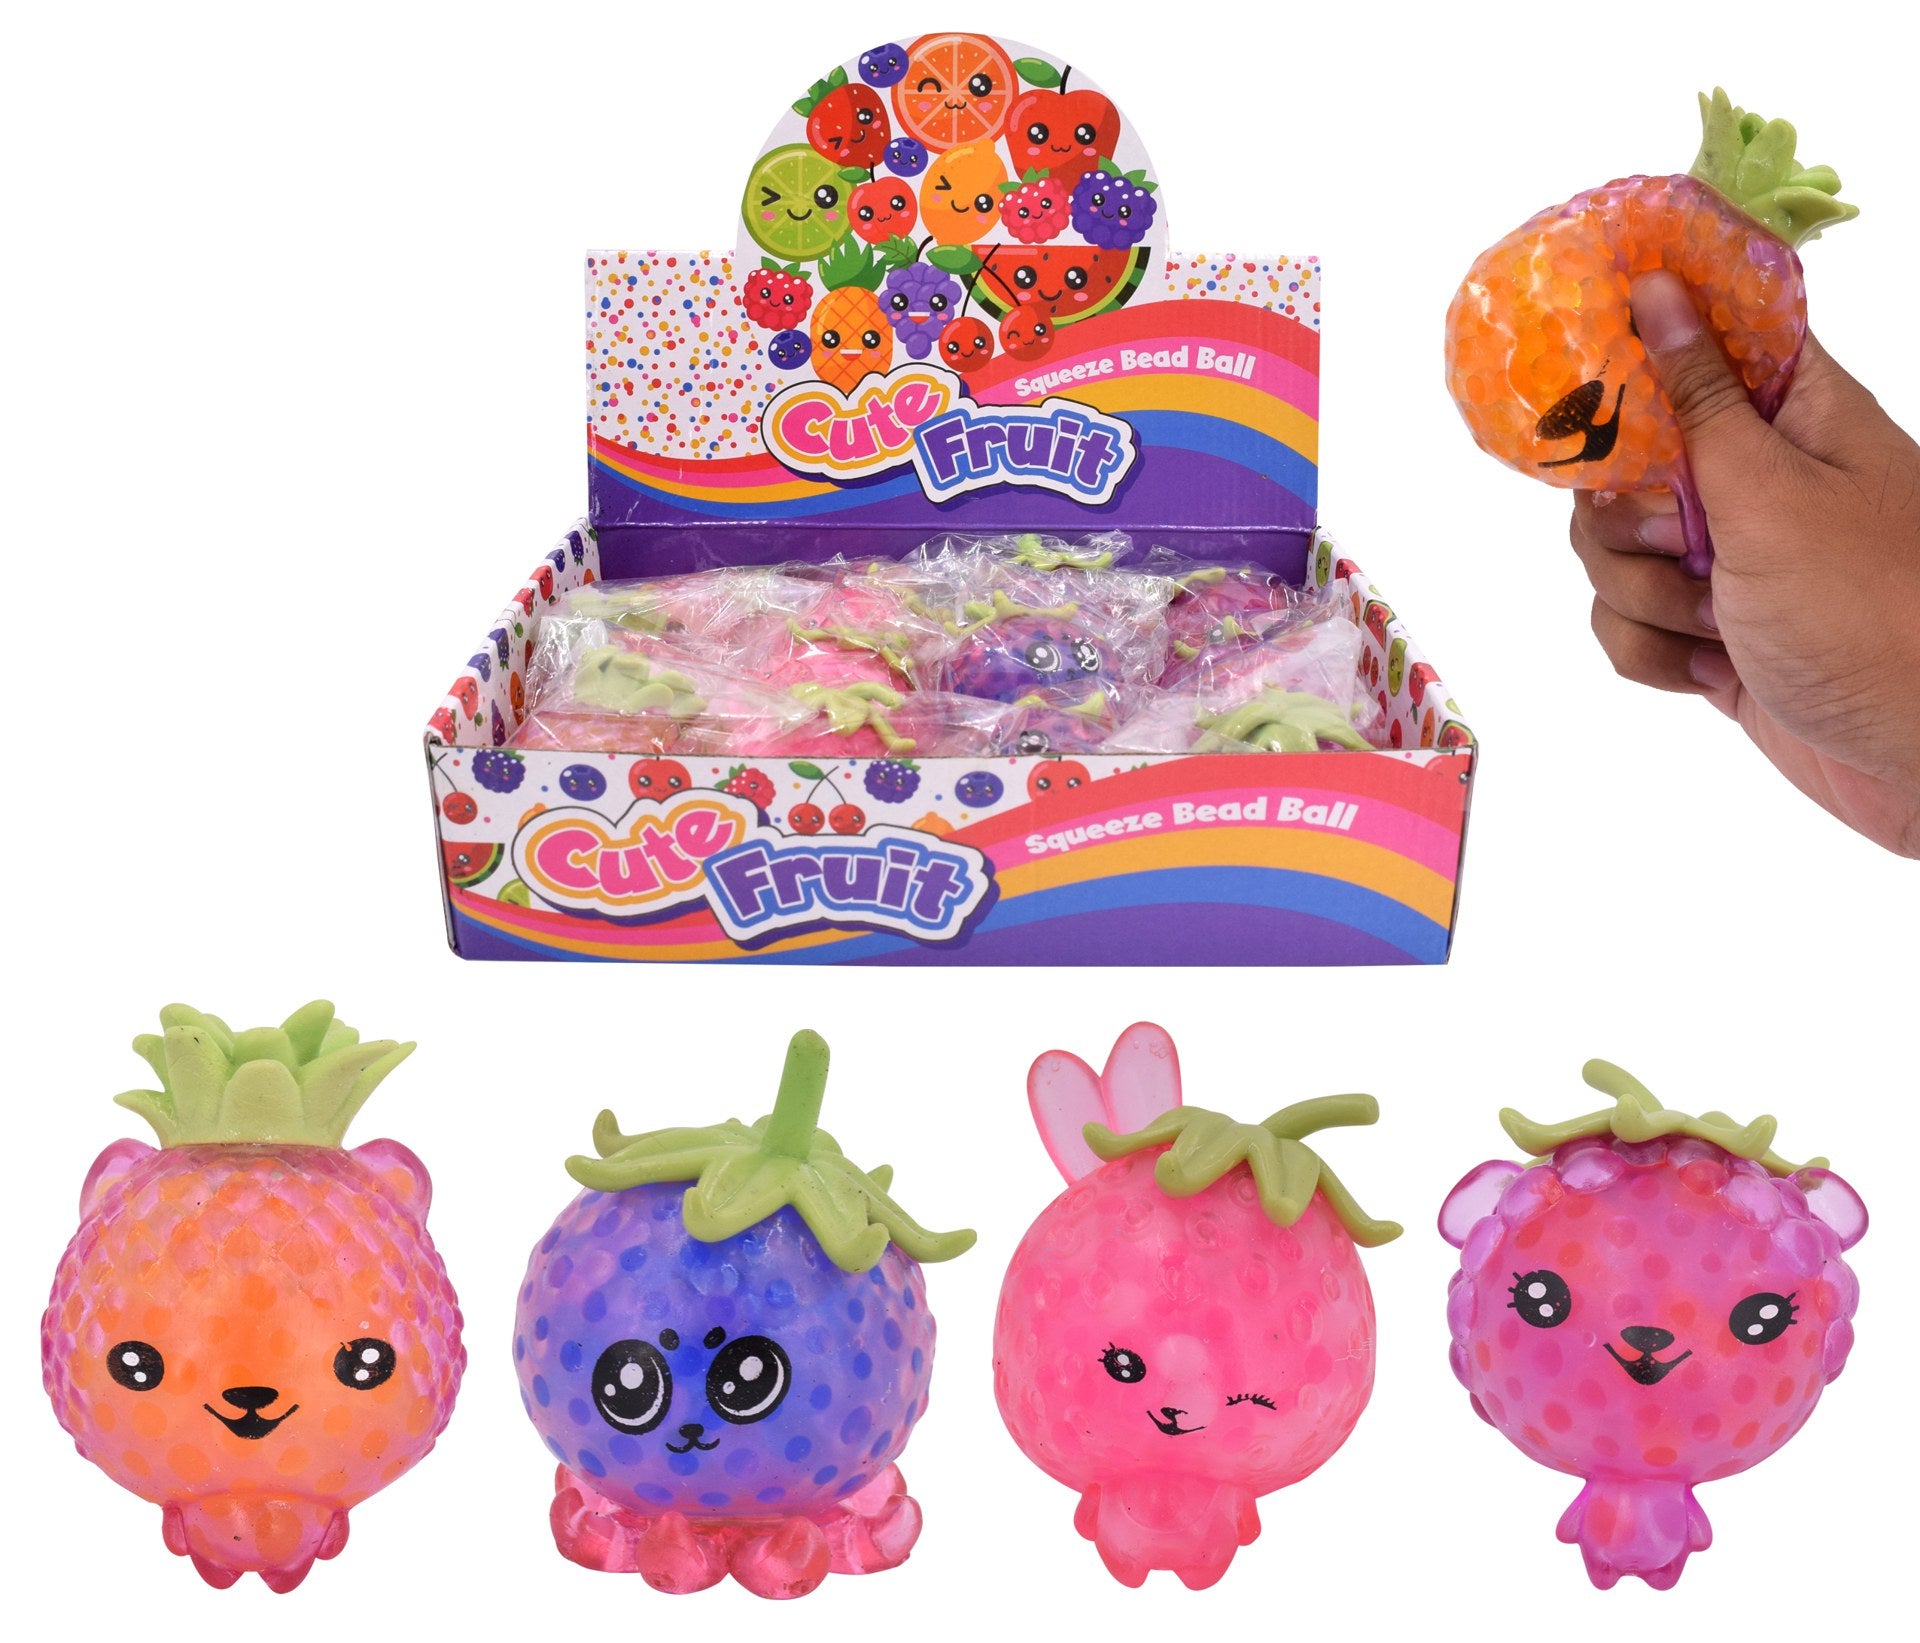 CUTE FRUIT SQUEEZE BEADS